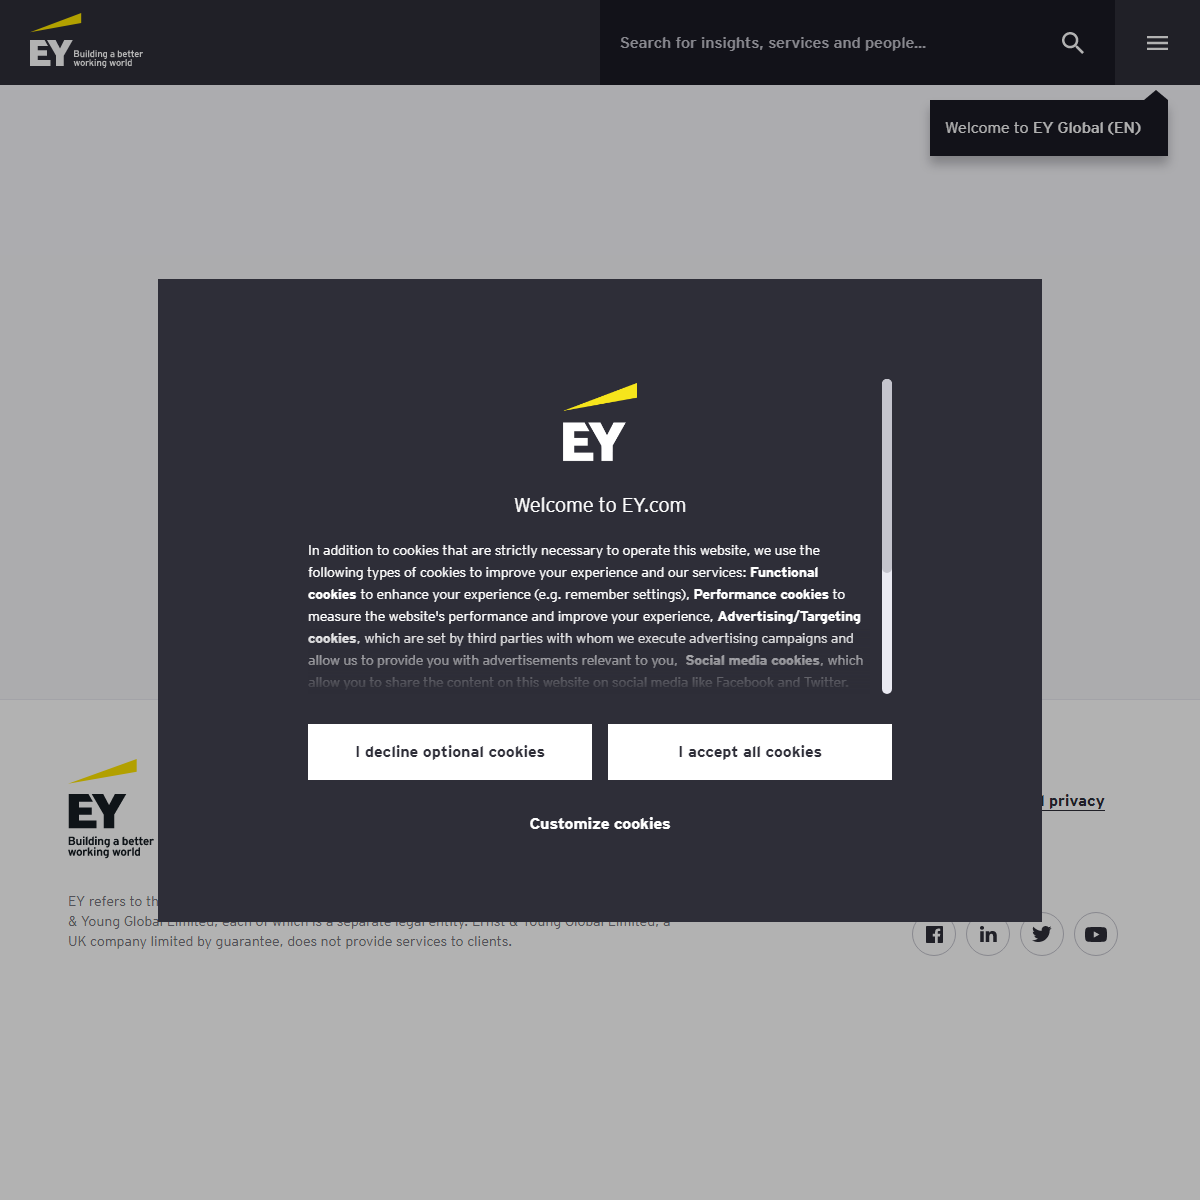 A complete backup of http://ey.com/IN/en/Services/EY-goods-and-services-tax-gst